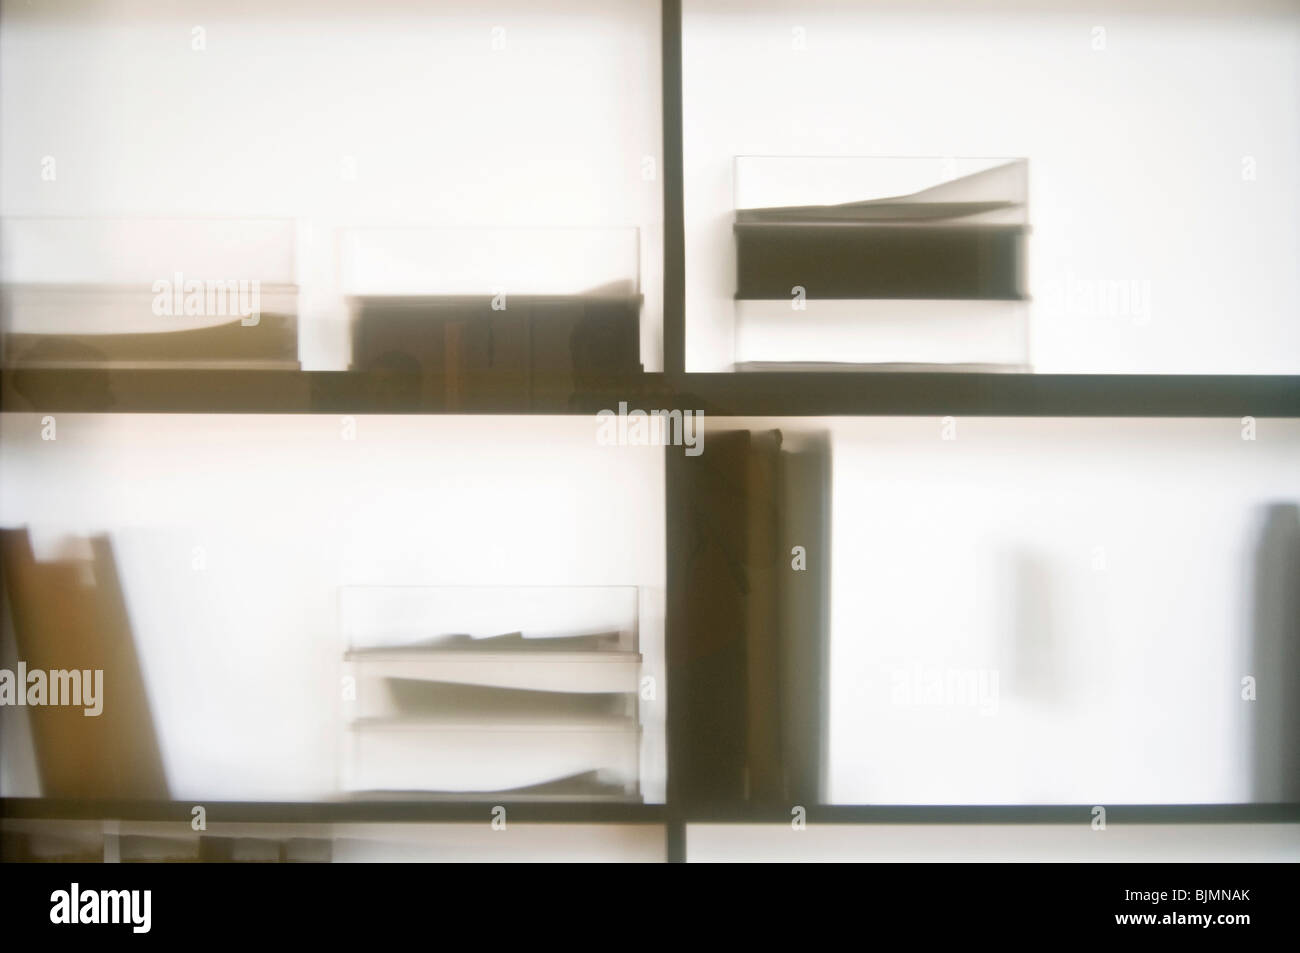 Shelves with trays and file folders behind a glass wall Stock Photo